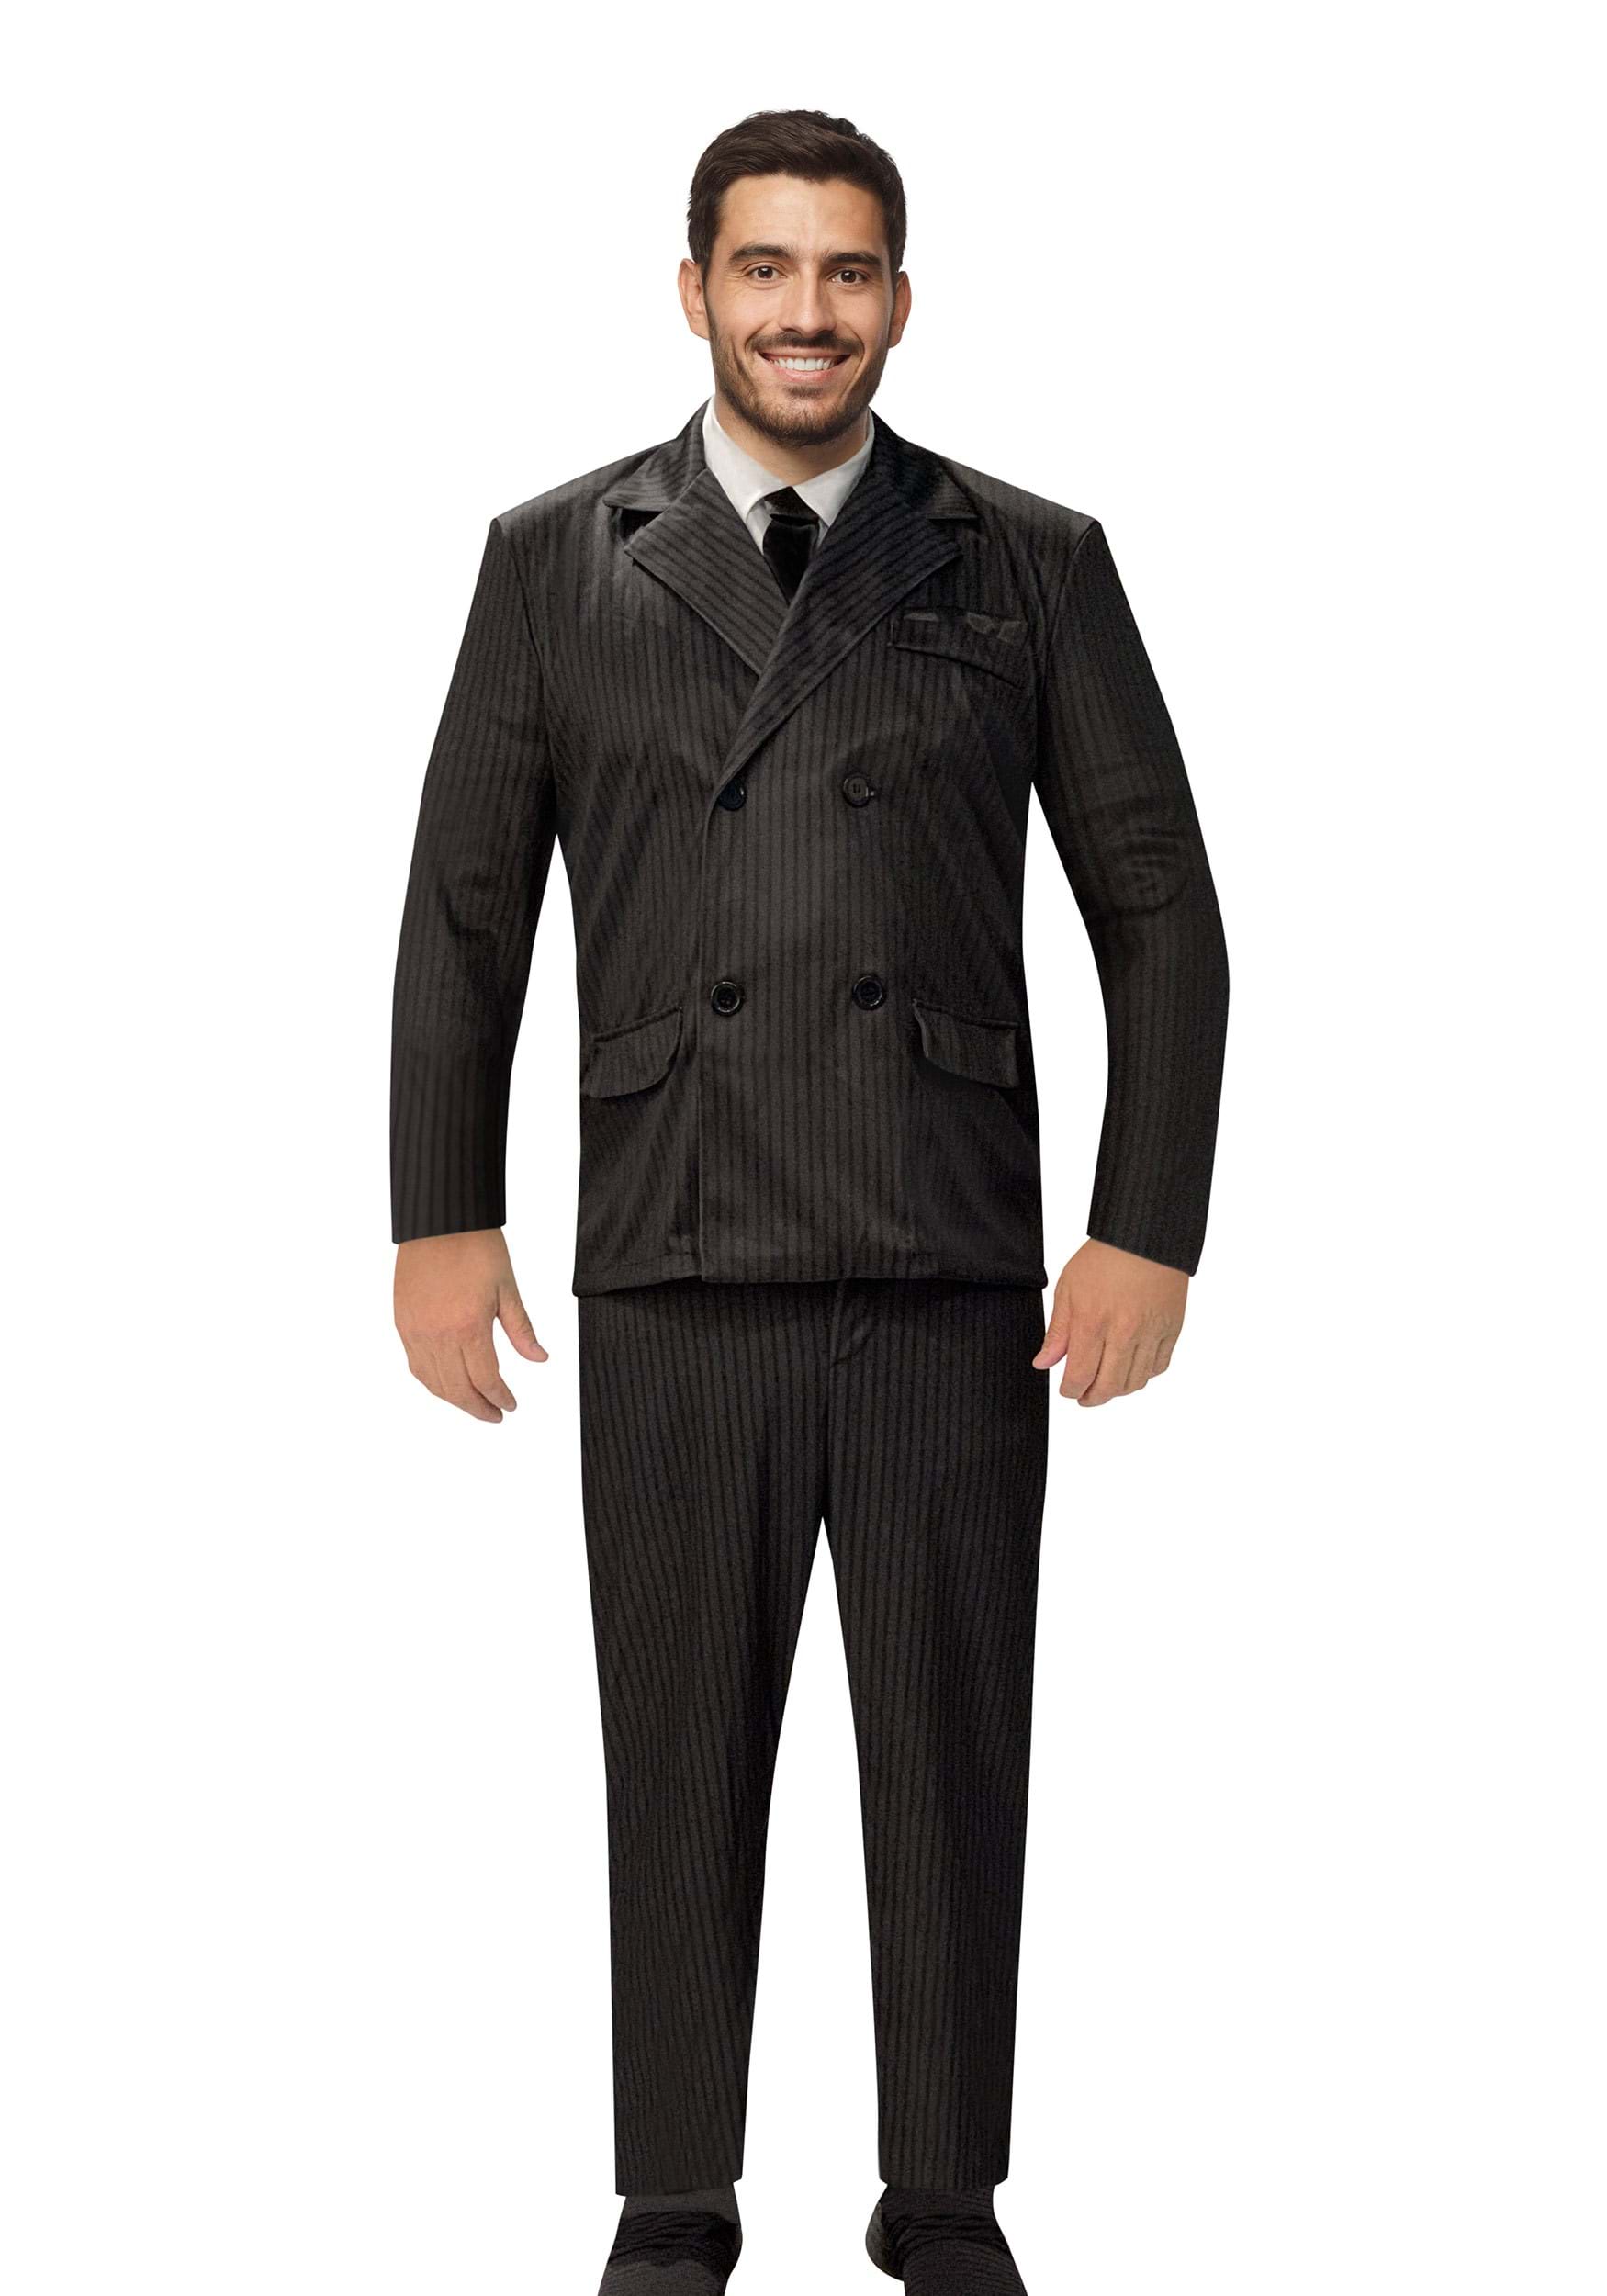 Photos - Fancy Dress Rubies Costume Co. Inc The Addams Family Gomez Costume for Adults Black 